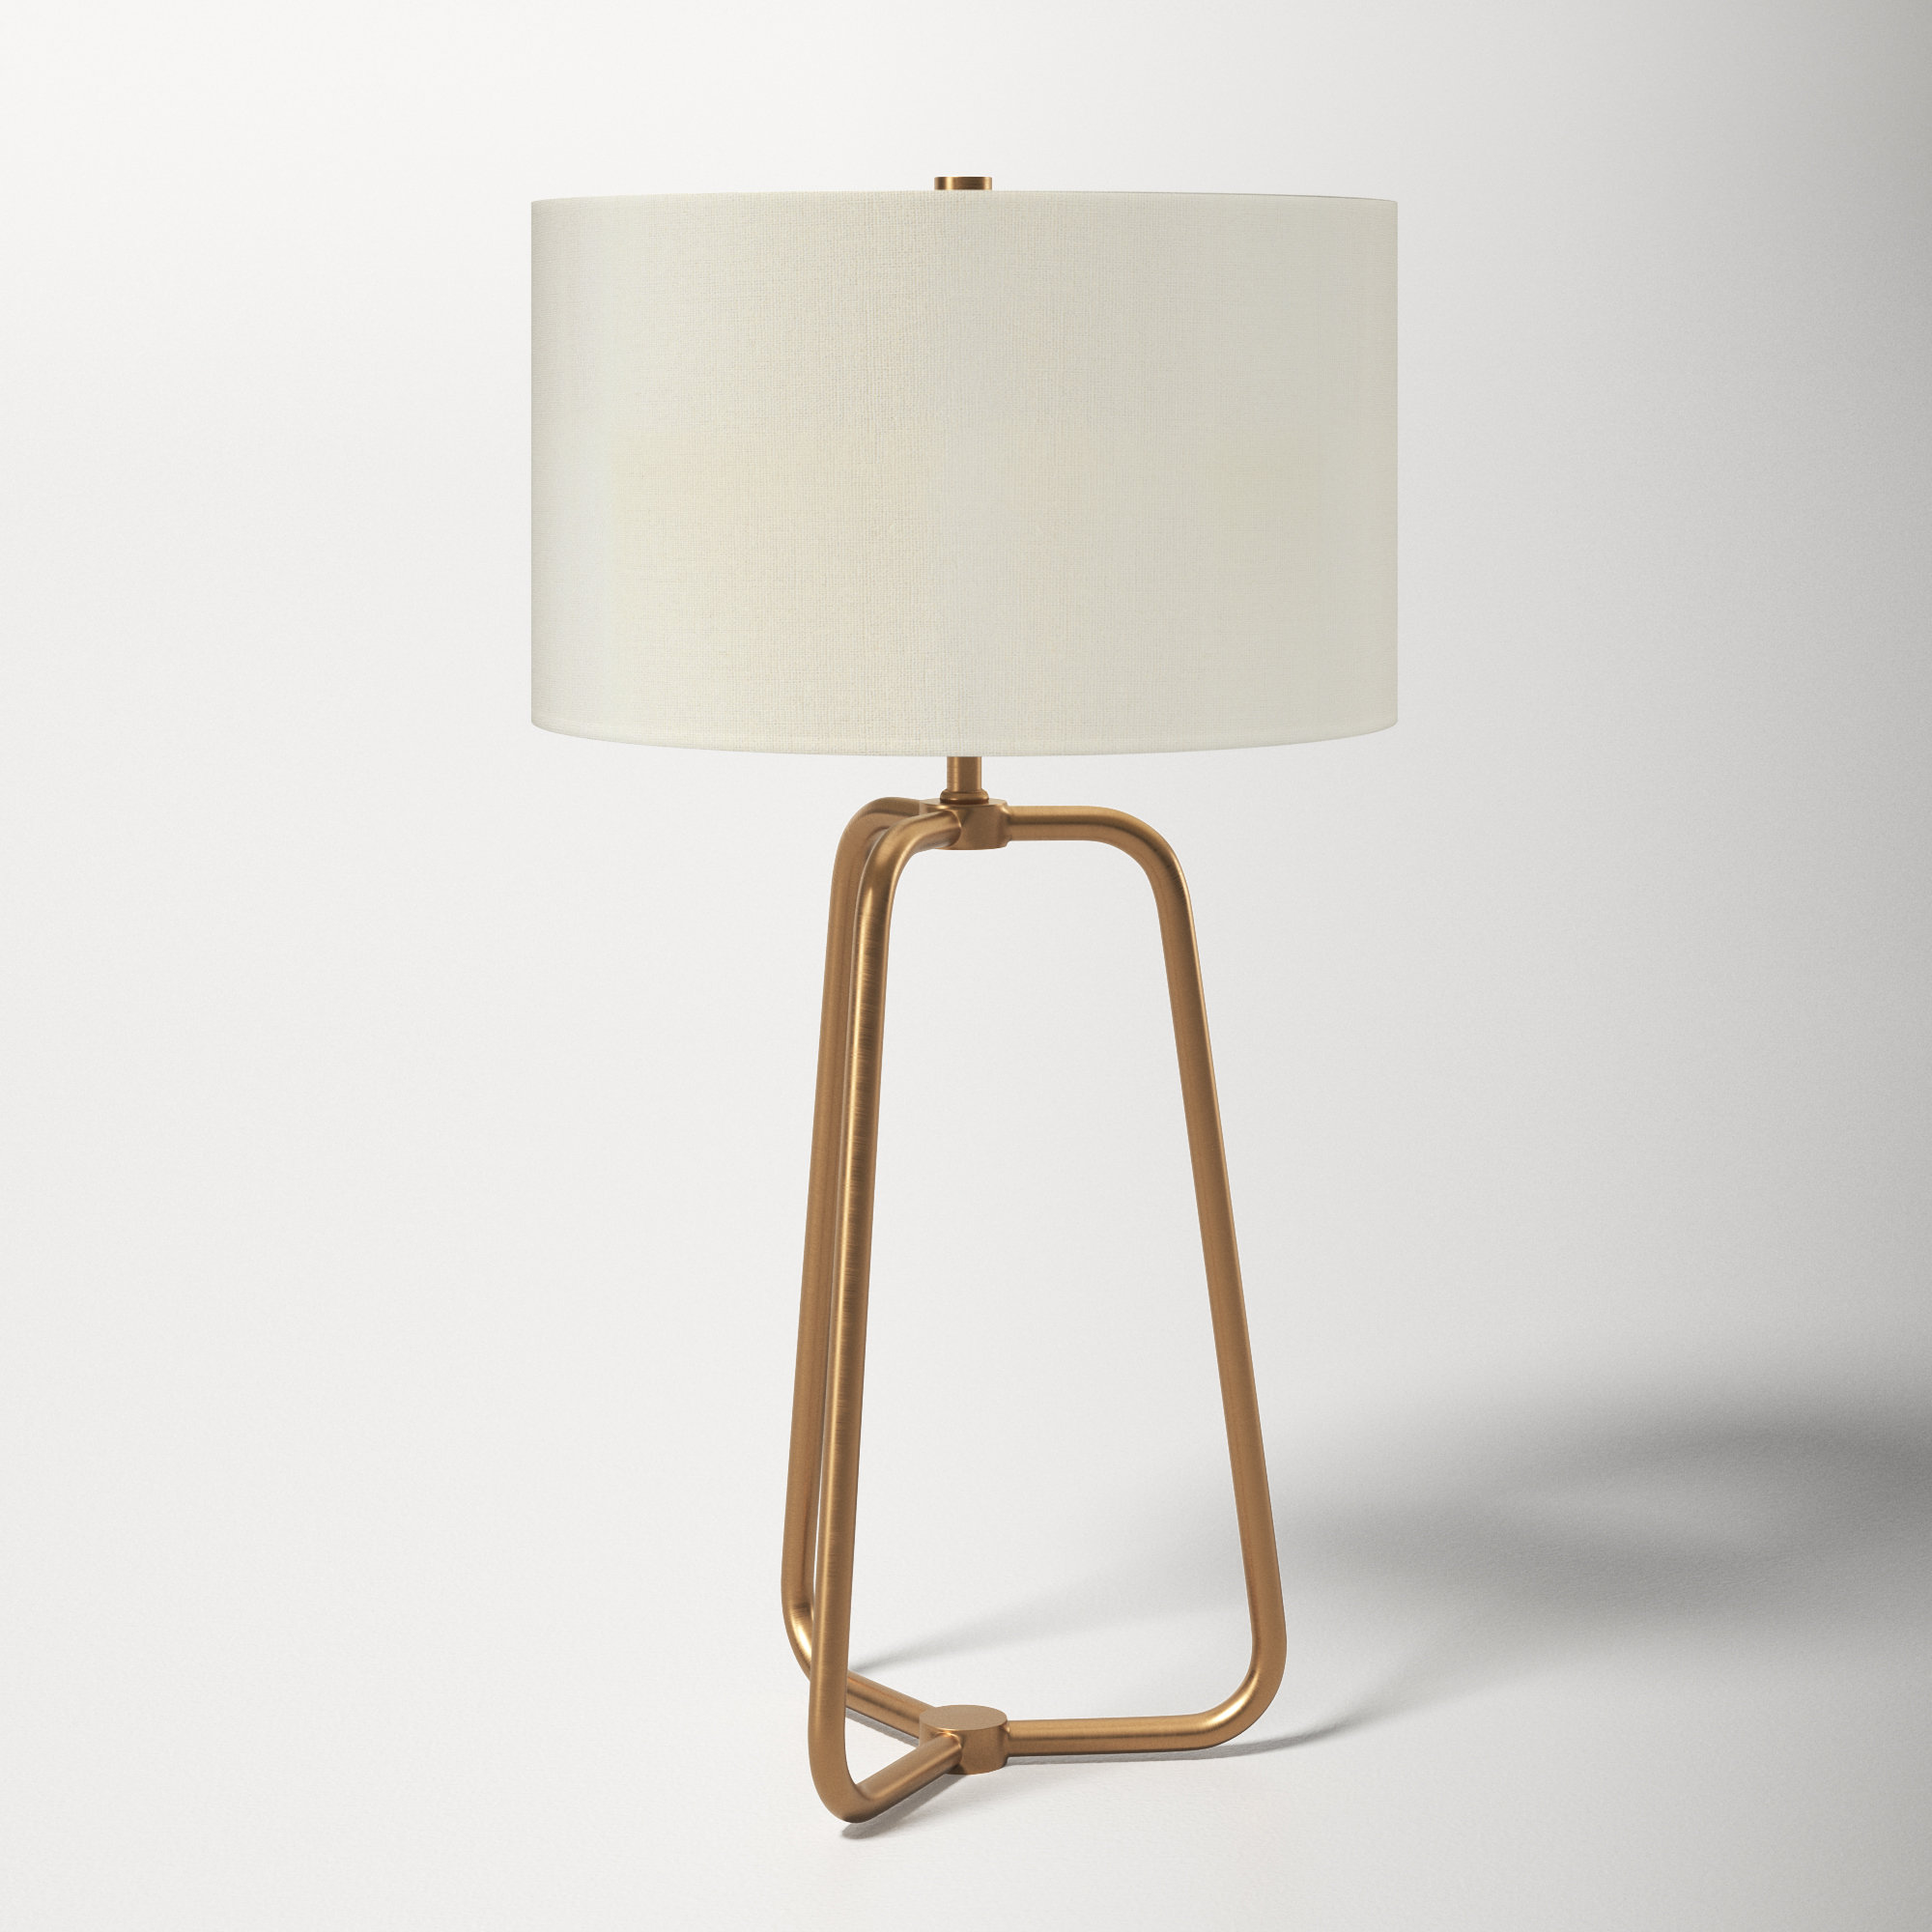 Wayfair | Antique Brass Table Lamps You'll Love in 2022